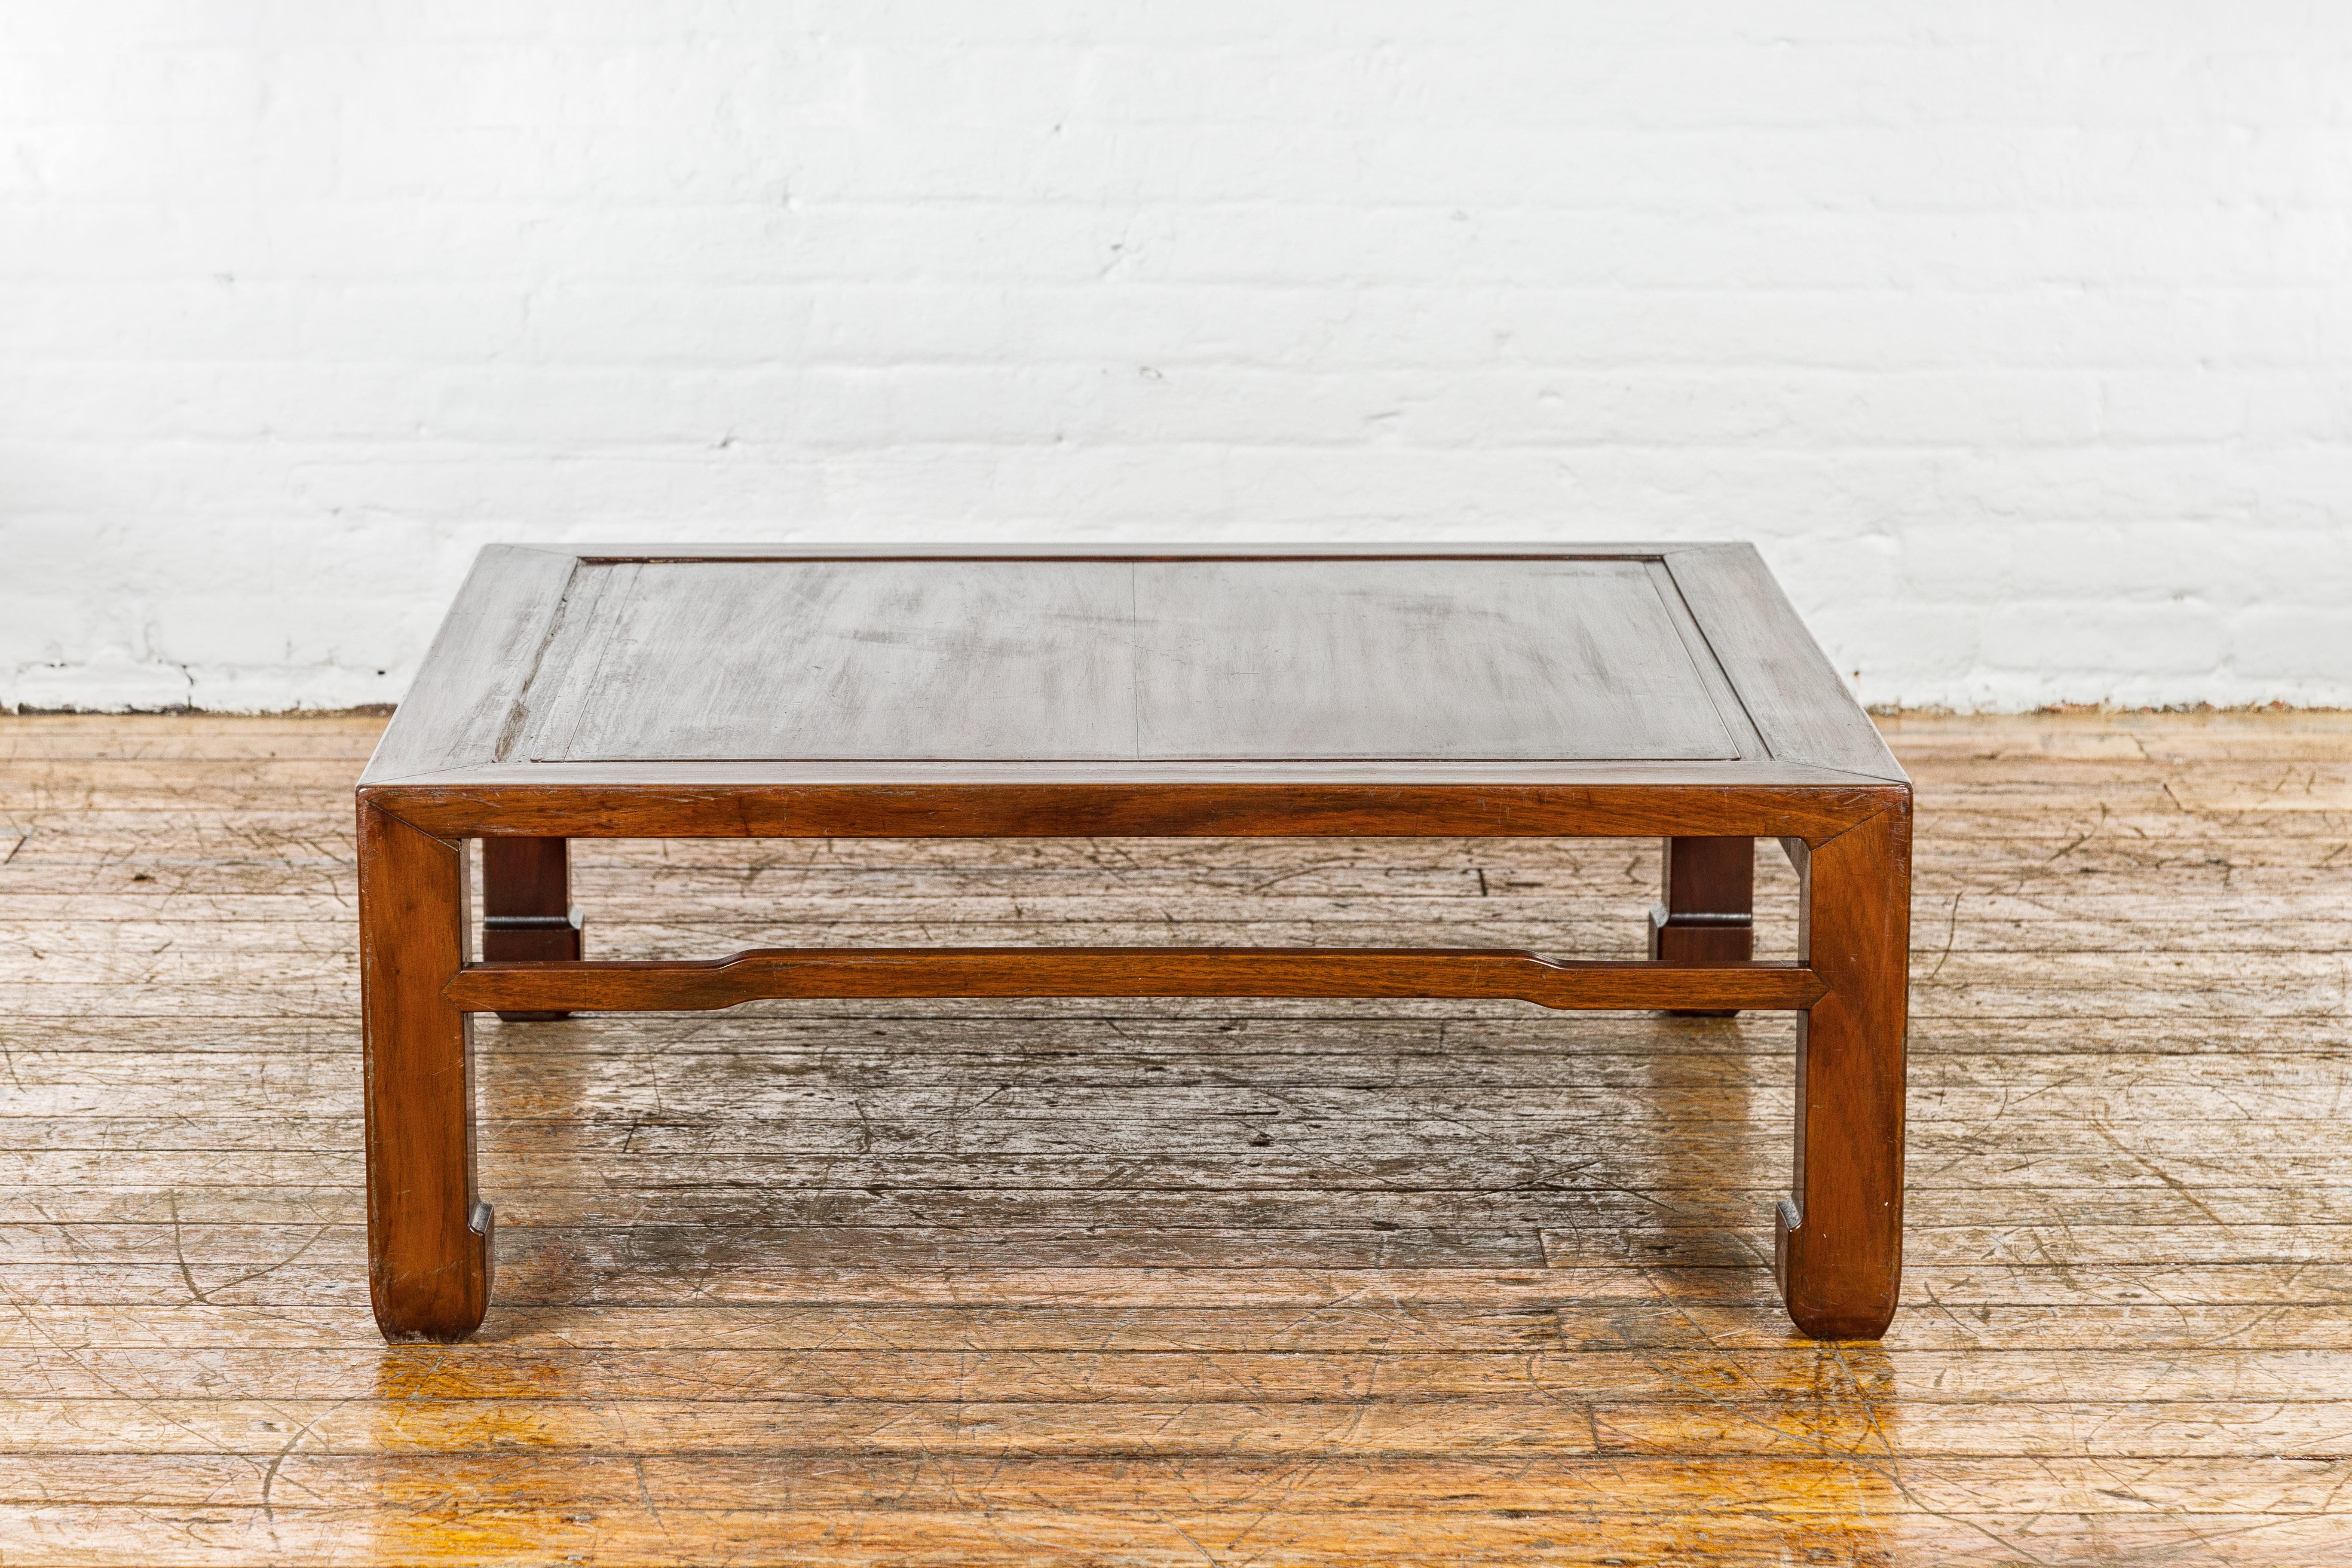 Late Qing Dynasty Square Coffee Table with Horse Hoof Legs and Stretchers For Sale 10